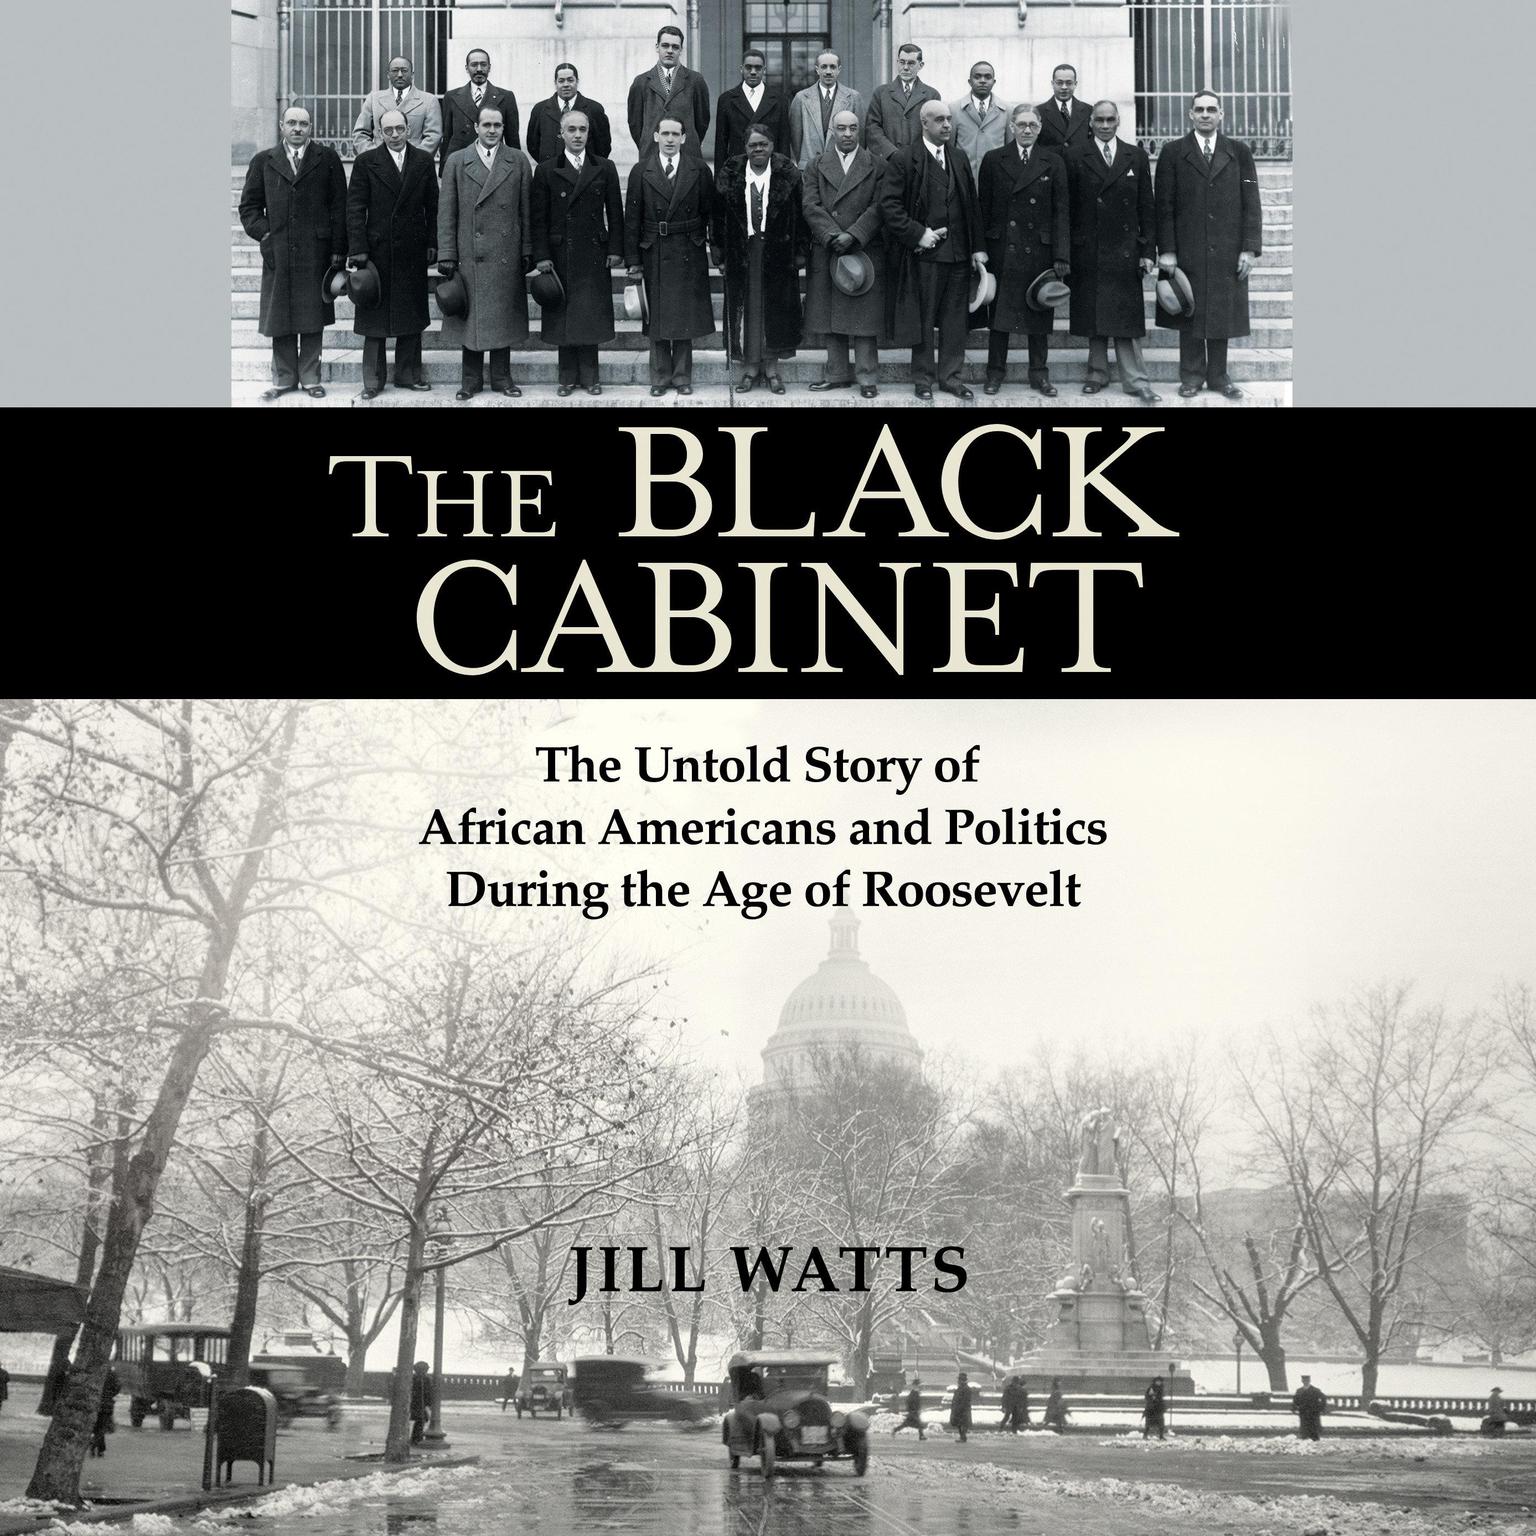 The Black Cabinet: The Untold Story of African Americans and Politics During the Age of Roosevelt Audiobook, by Jill Watts